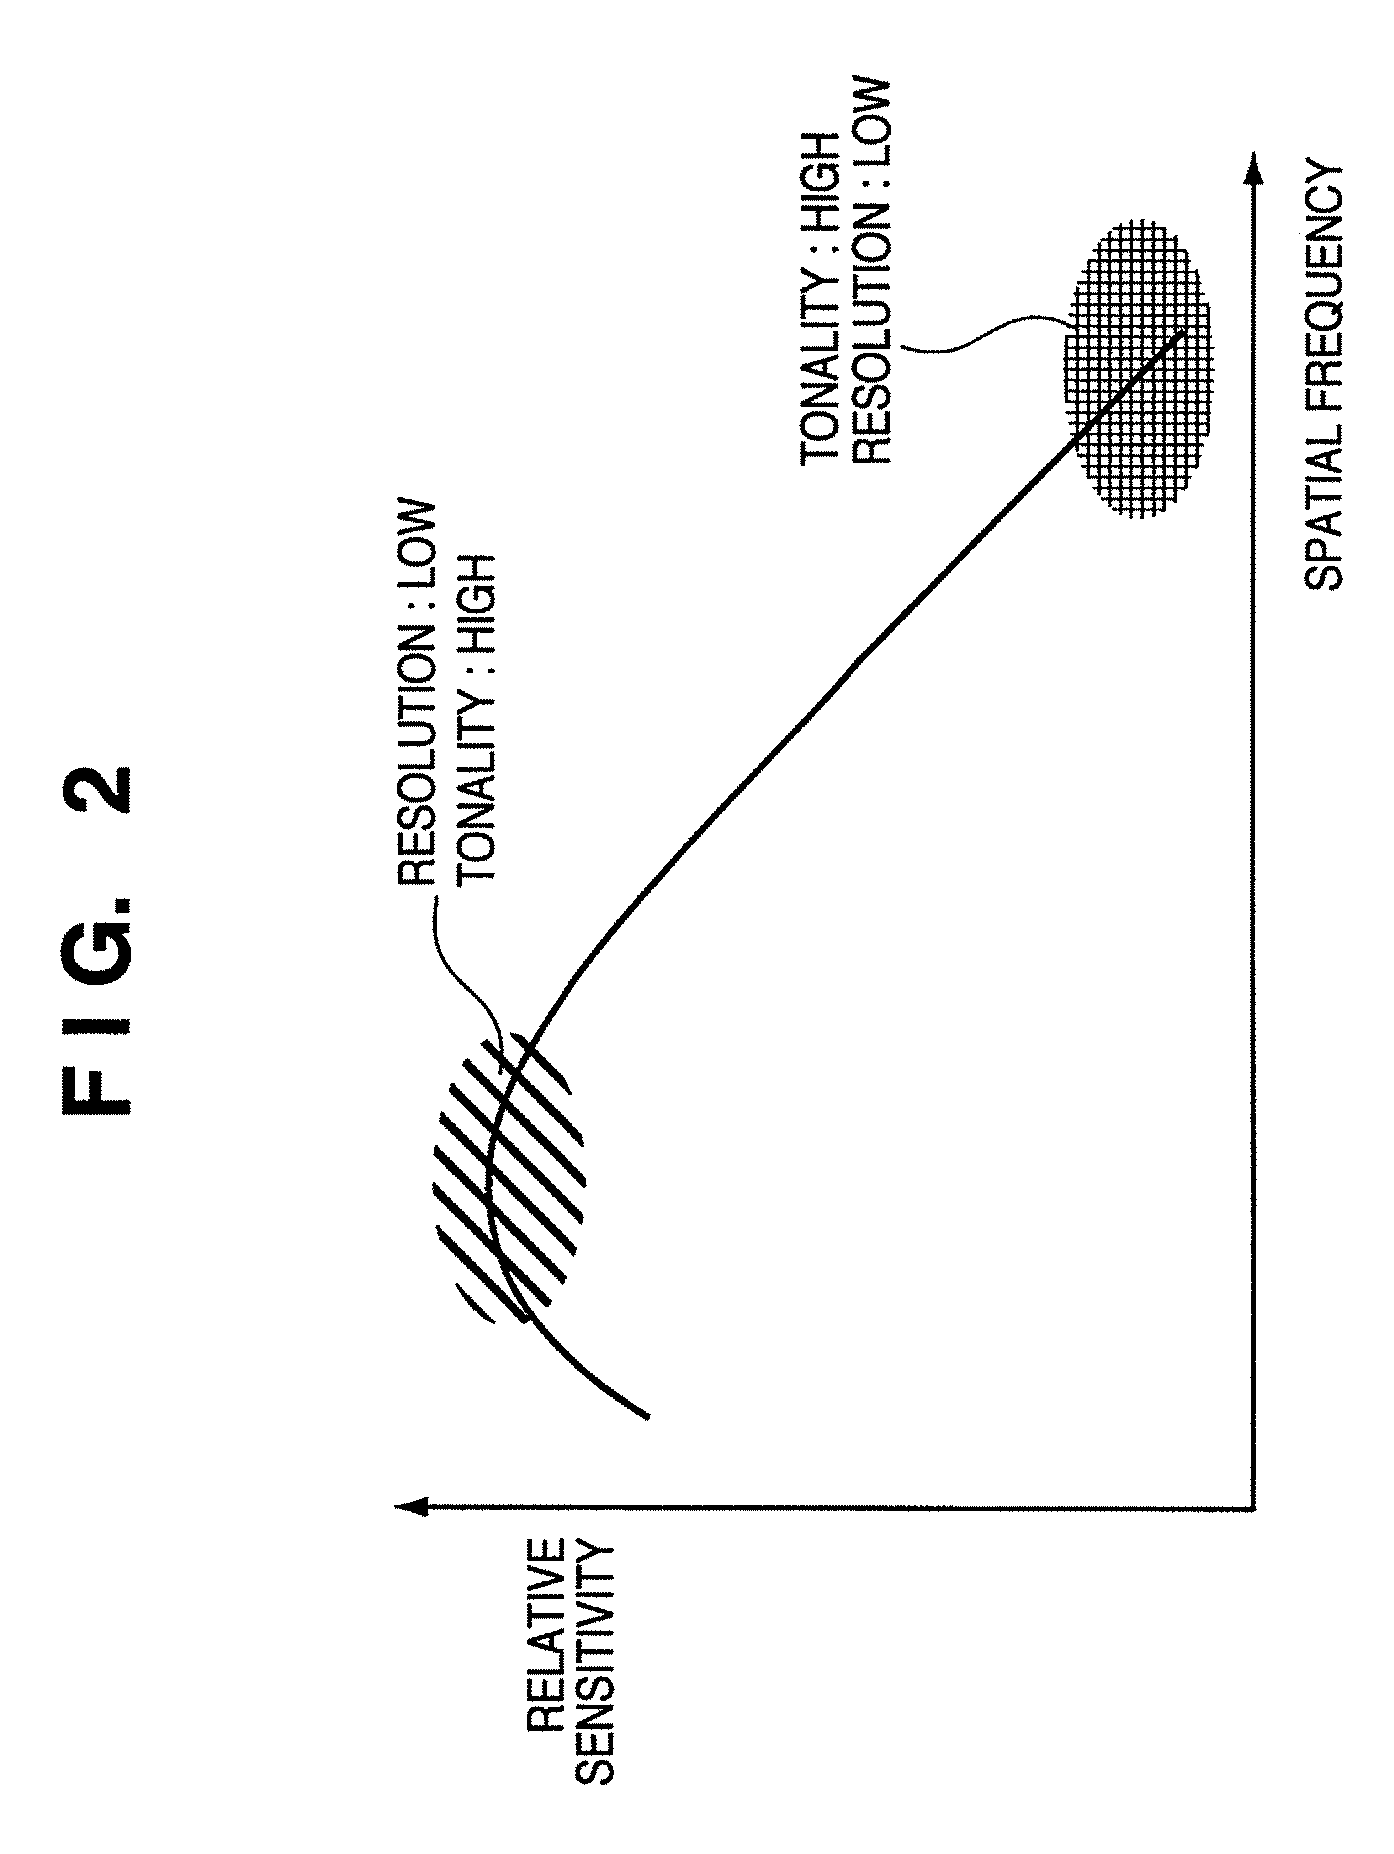 Image encoding apparatus and decoding apparatus, and control method thereof